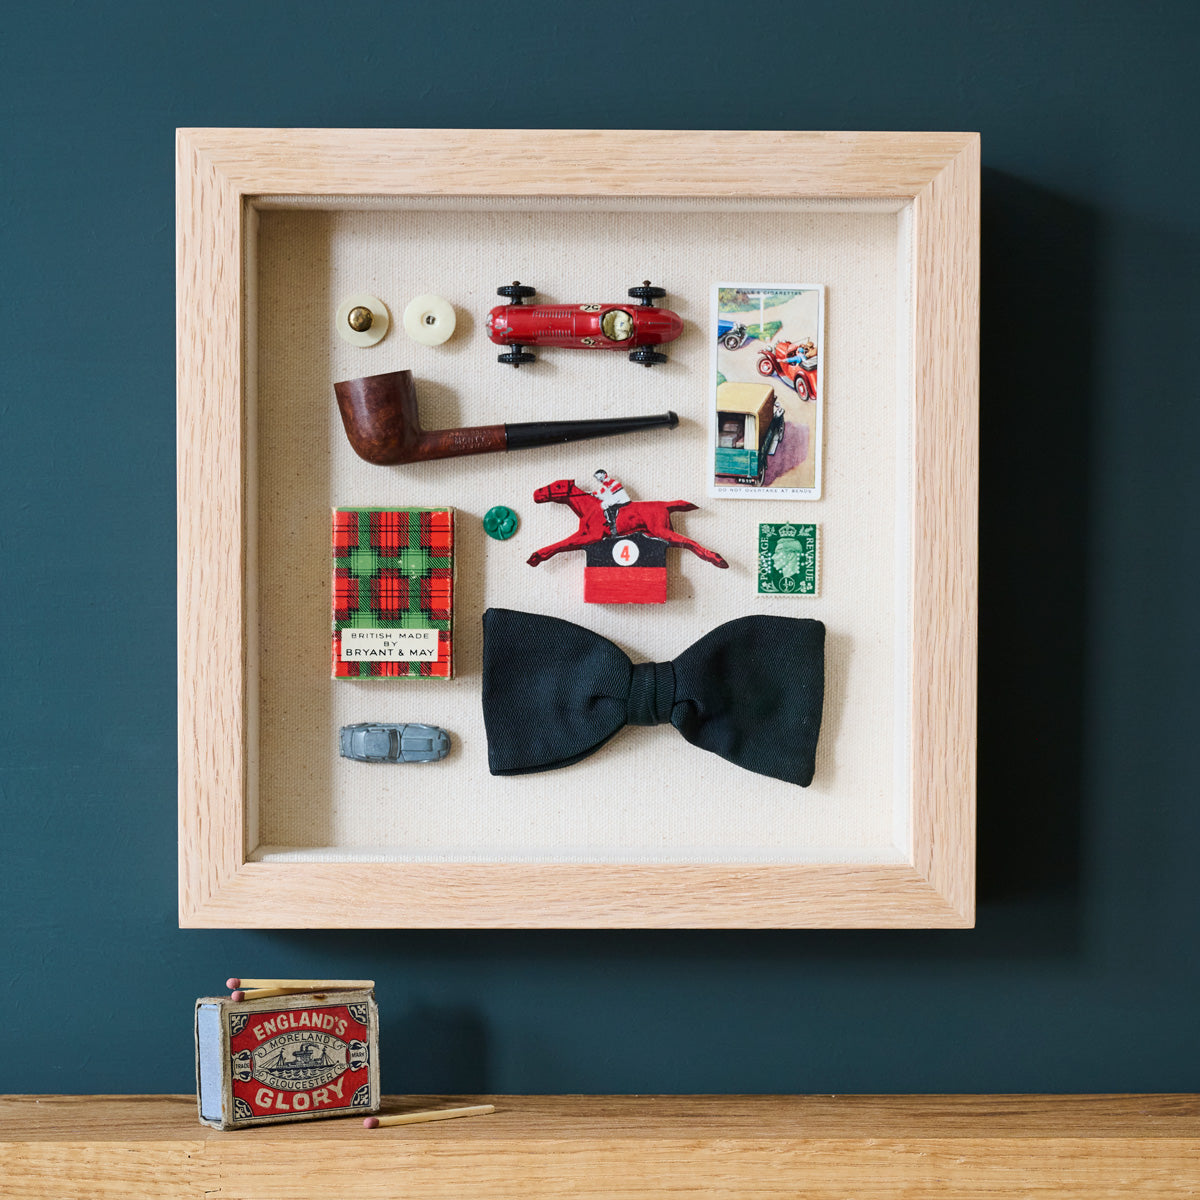 Man About Town – Pockets Collection No. 6  – Vintage Object Assemblage Artwork